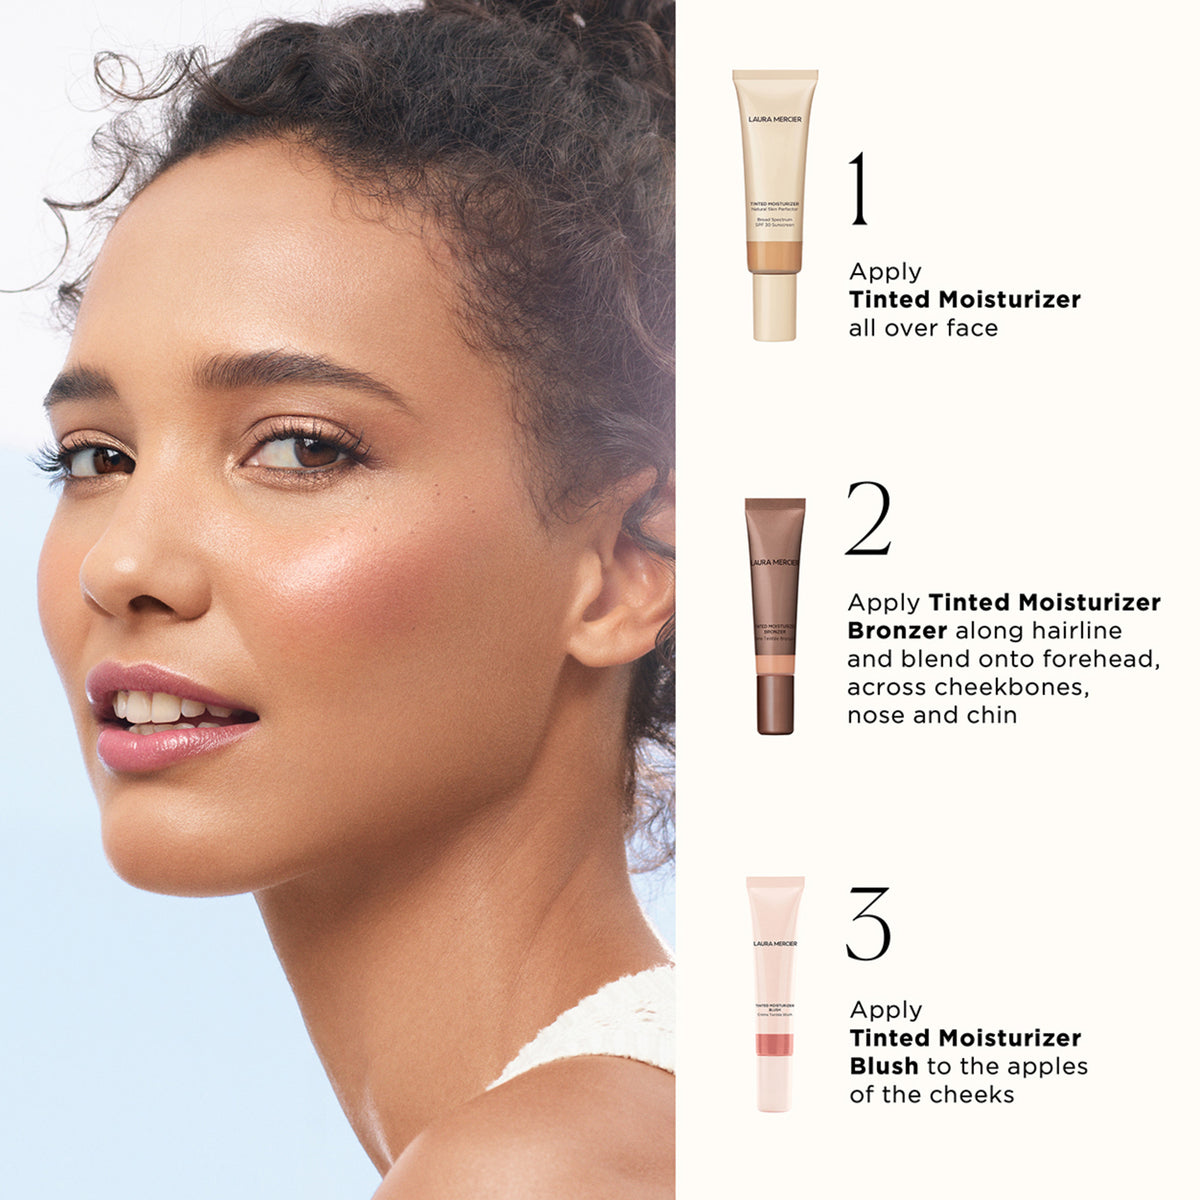 Laura Mercier Tinted Moisturizer Bronzer . This product is for deep complexions